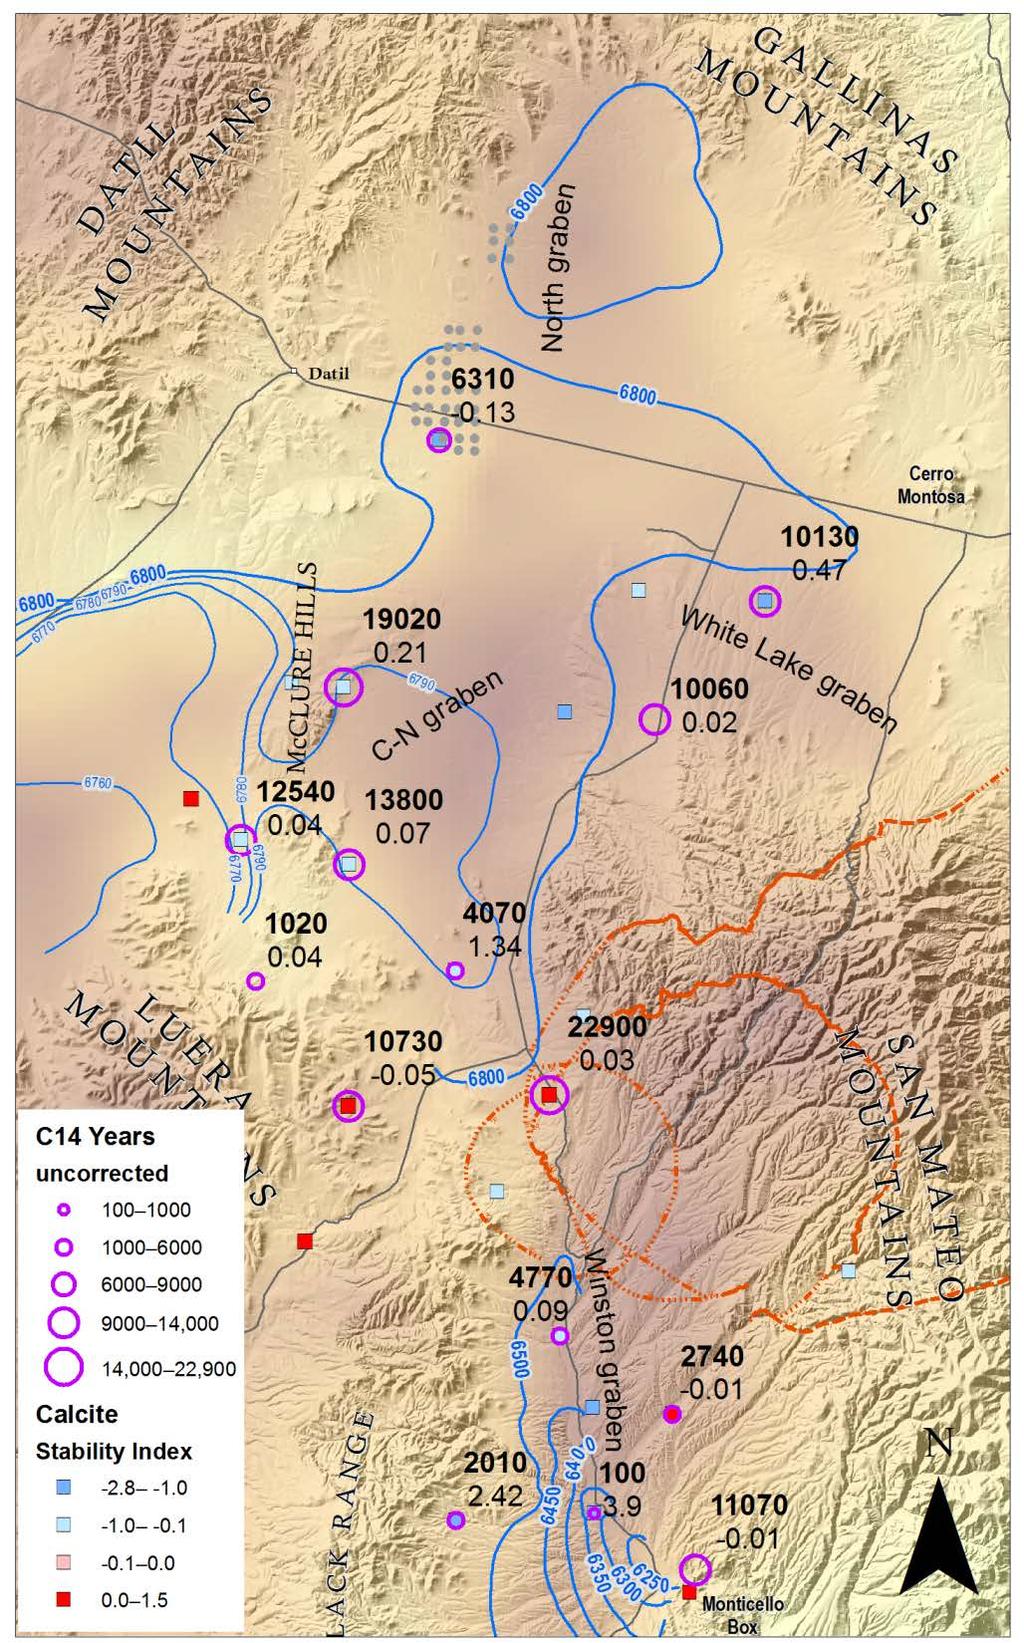 Groundwater Ages Groundwater ages in center of eastern SA Plains about 10 kyr. Tritium present and C14 young in most Alamosa Creek wells. SA Plains temperatureaffected well has 19 kyr C14.